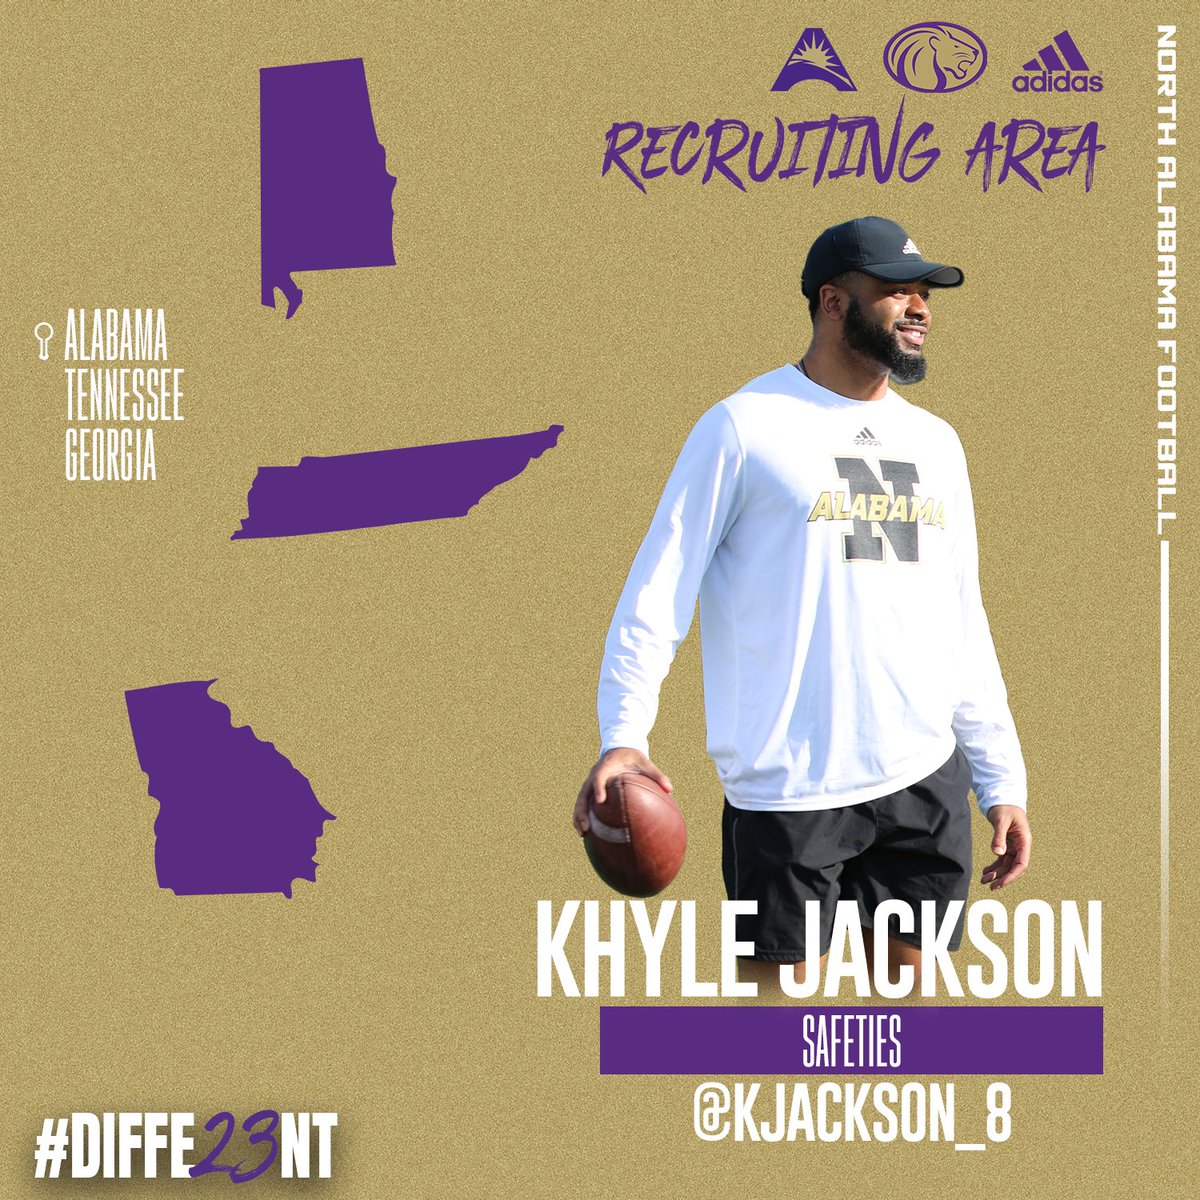 Our Safeties Coach, Coach Jackson will be recruiting different areas in the states of Alabama, Tennessee, and Georgia. Make sure to give him a follow @kjackson_8 #RoarLions